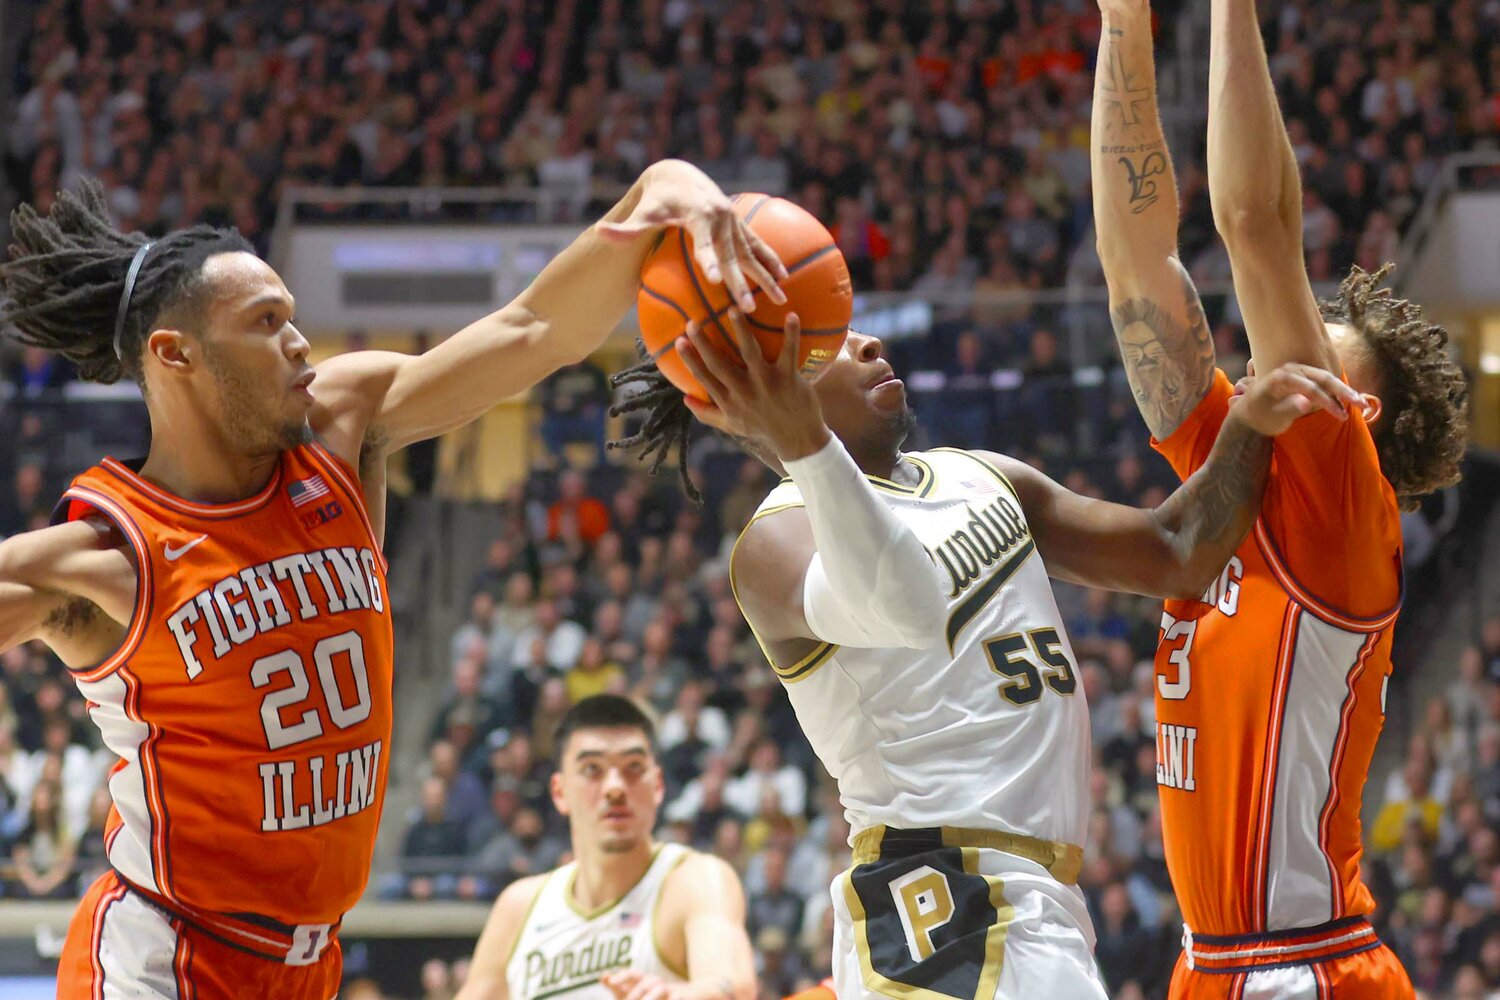 Ty Rodgers of Illinois - blocking shot by Lance Jones of Purdue